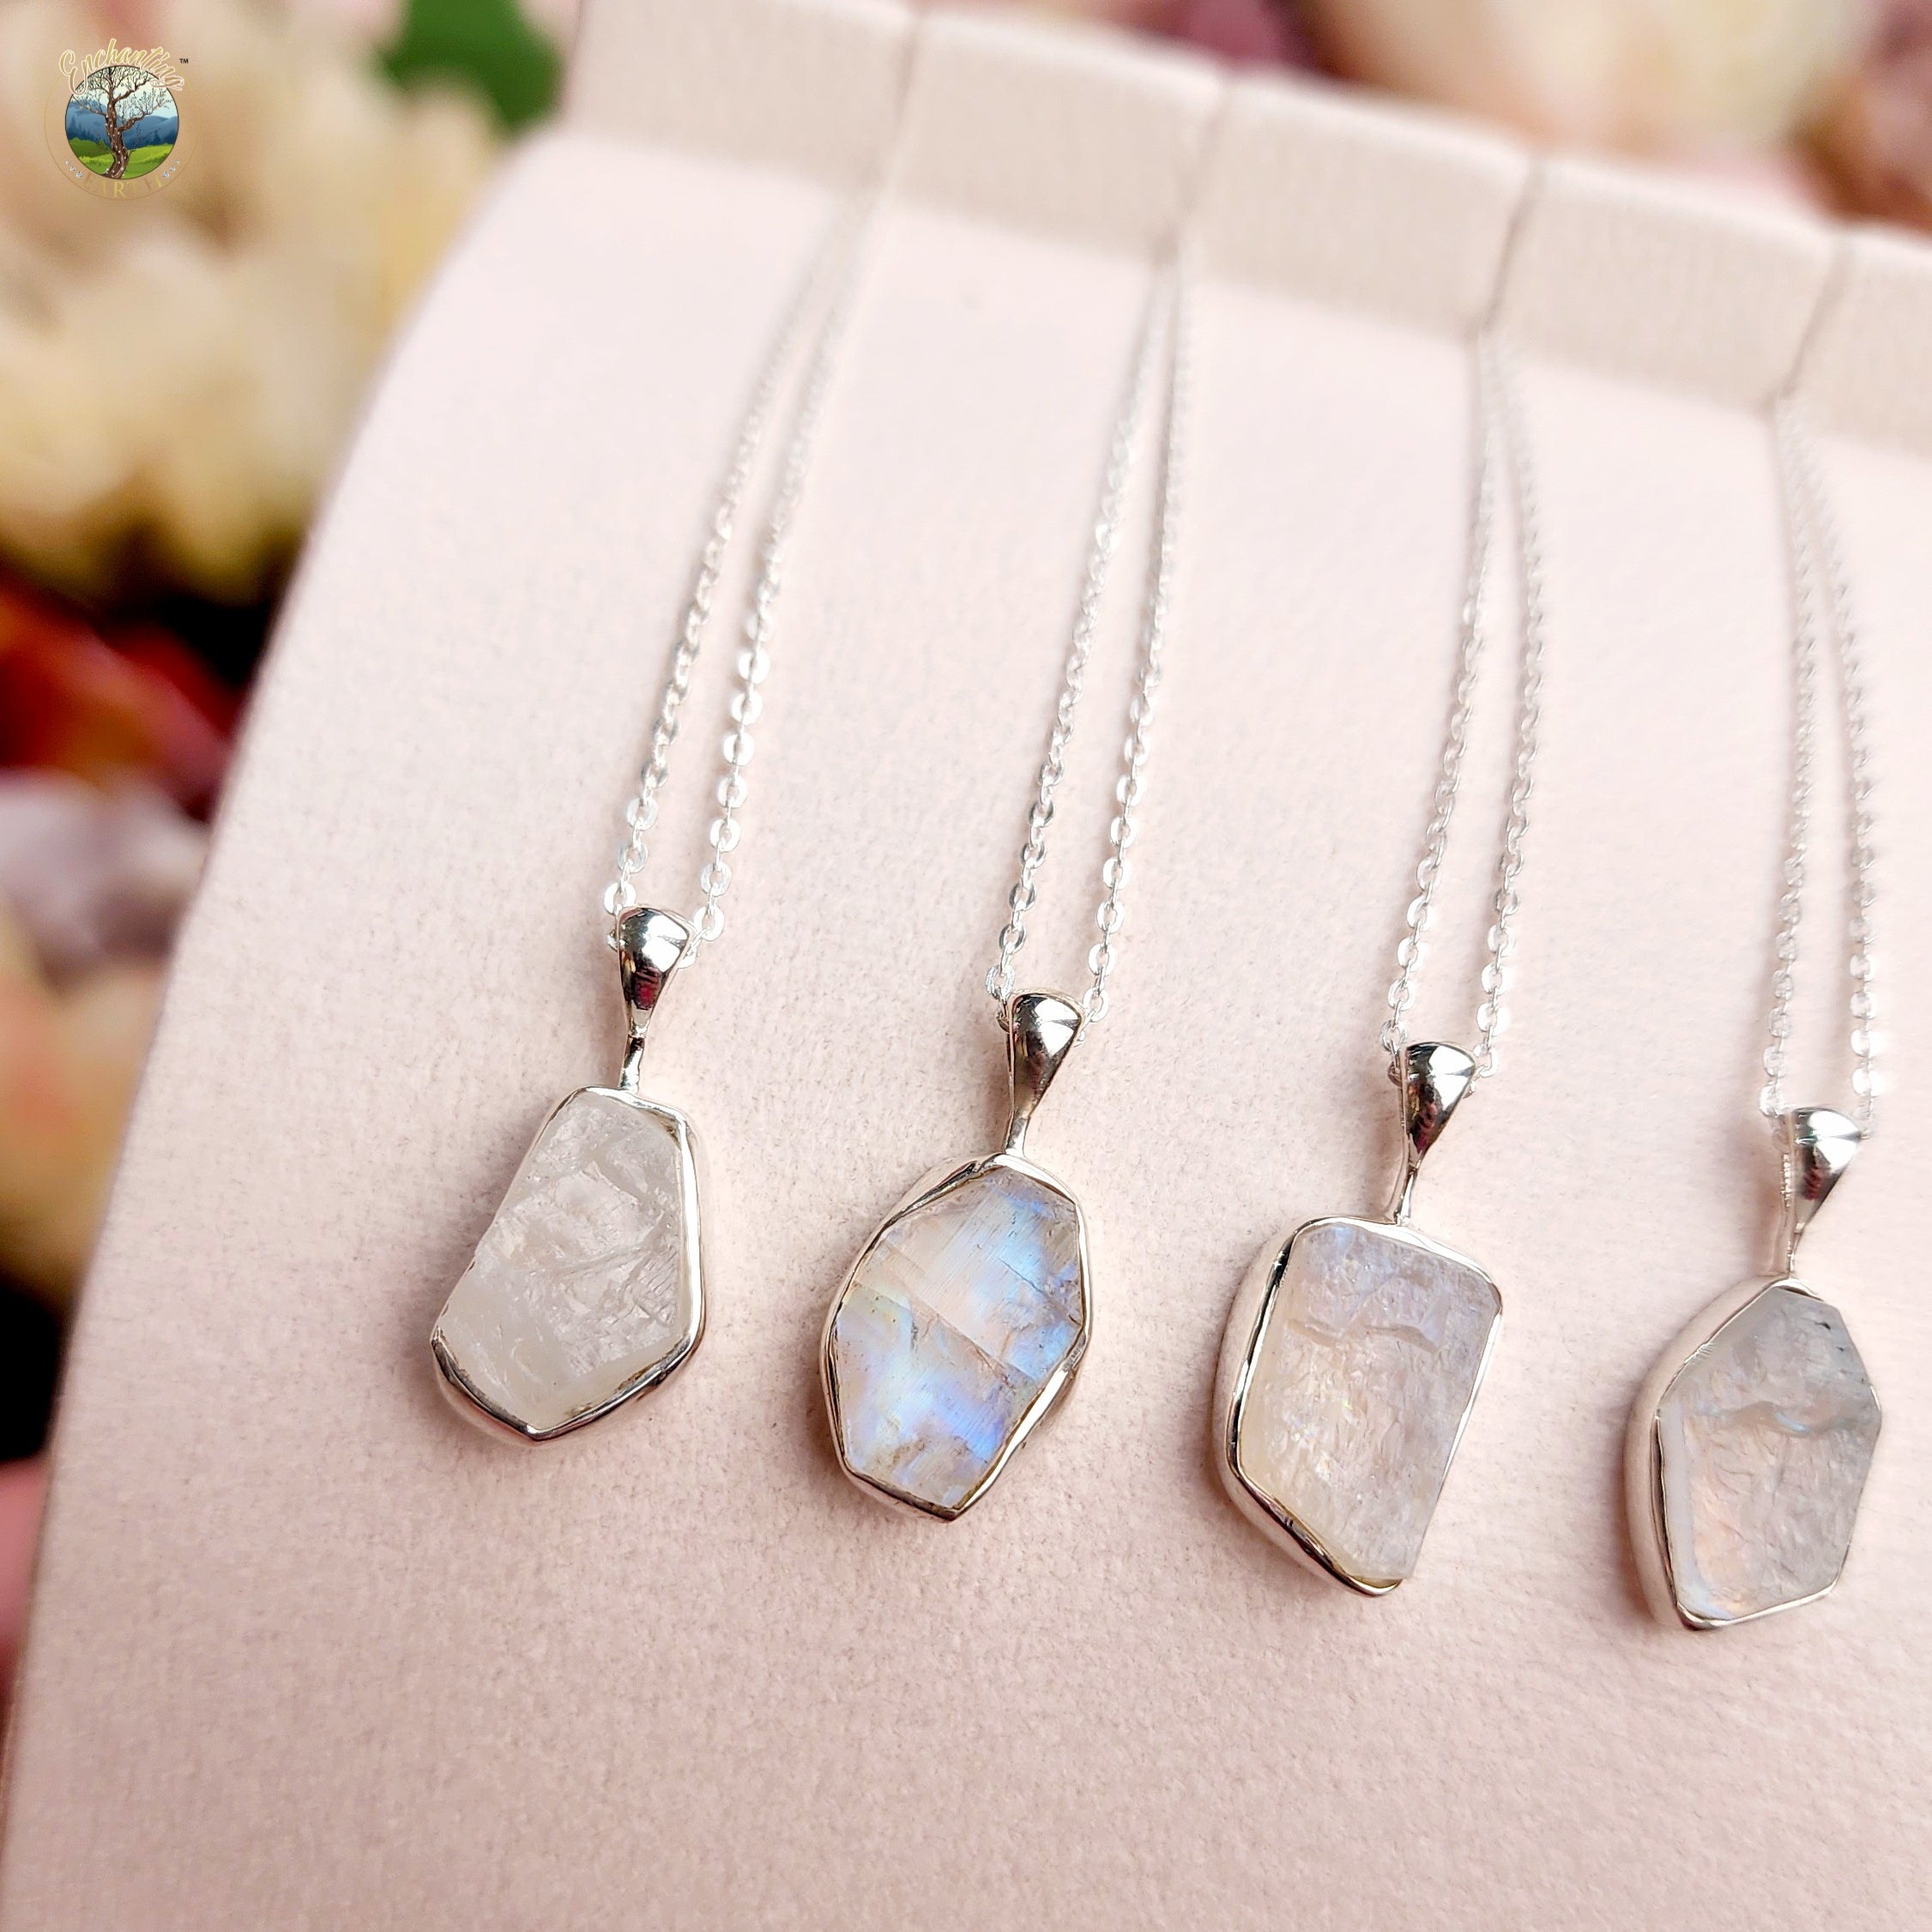 Rainbow Moonstone Raw Necklace .925 Silver for Intuition and New Beginnings